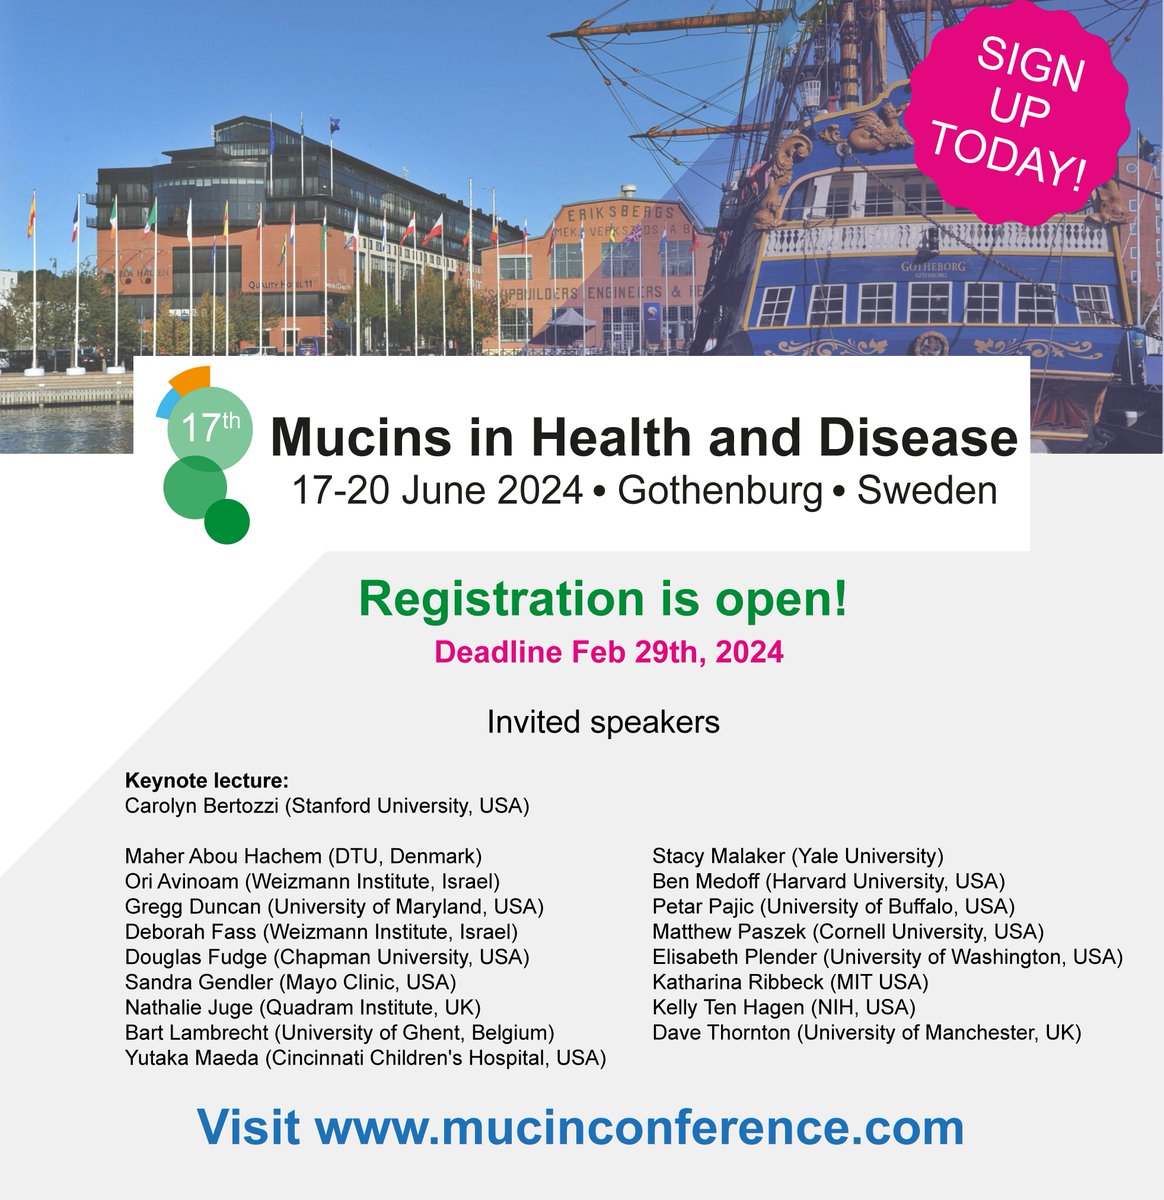 We just opened registrations for Mucins in Health and Disease 2024! With a fantastic lineup of invited speakers we hope to welcome you all to Gothenburg 17-20 June 2024. Spots are limited so hurry up and register! #glycotime #mucins